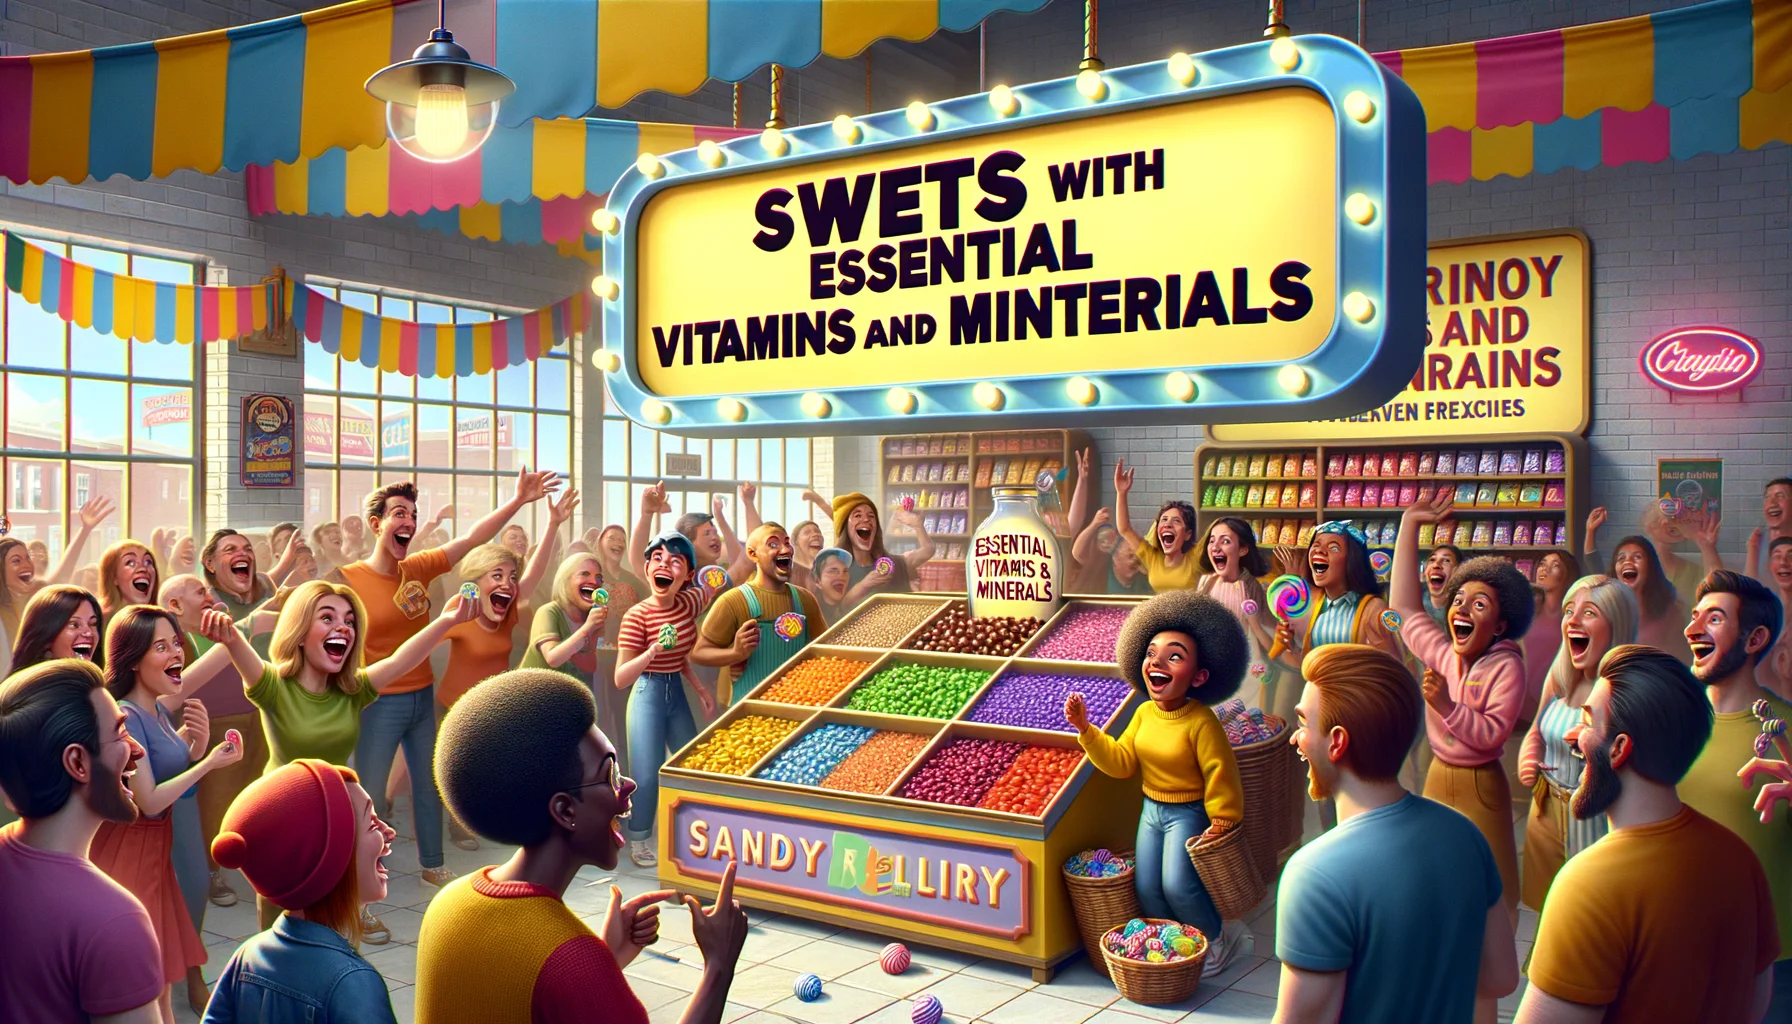 Create a humorously realistic scene that could go viral, showcasing a set of confections ingeniously infused with essential vitamins and minerals. The setting is a bright, cheery candy store with displays full of colorful sweets. There's a crowd of diverse people laughing and pointing at the candies, their faces showing surprise and pleasure in discovering that these sweets are also nutritious. On a large sign overhead, vibrant letters spell out, 'Sweets with Essential Vitamins and Minerals.' Make sure the overall atmosphere is pretty fun and the image delivers a sense of delight and amusement.